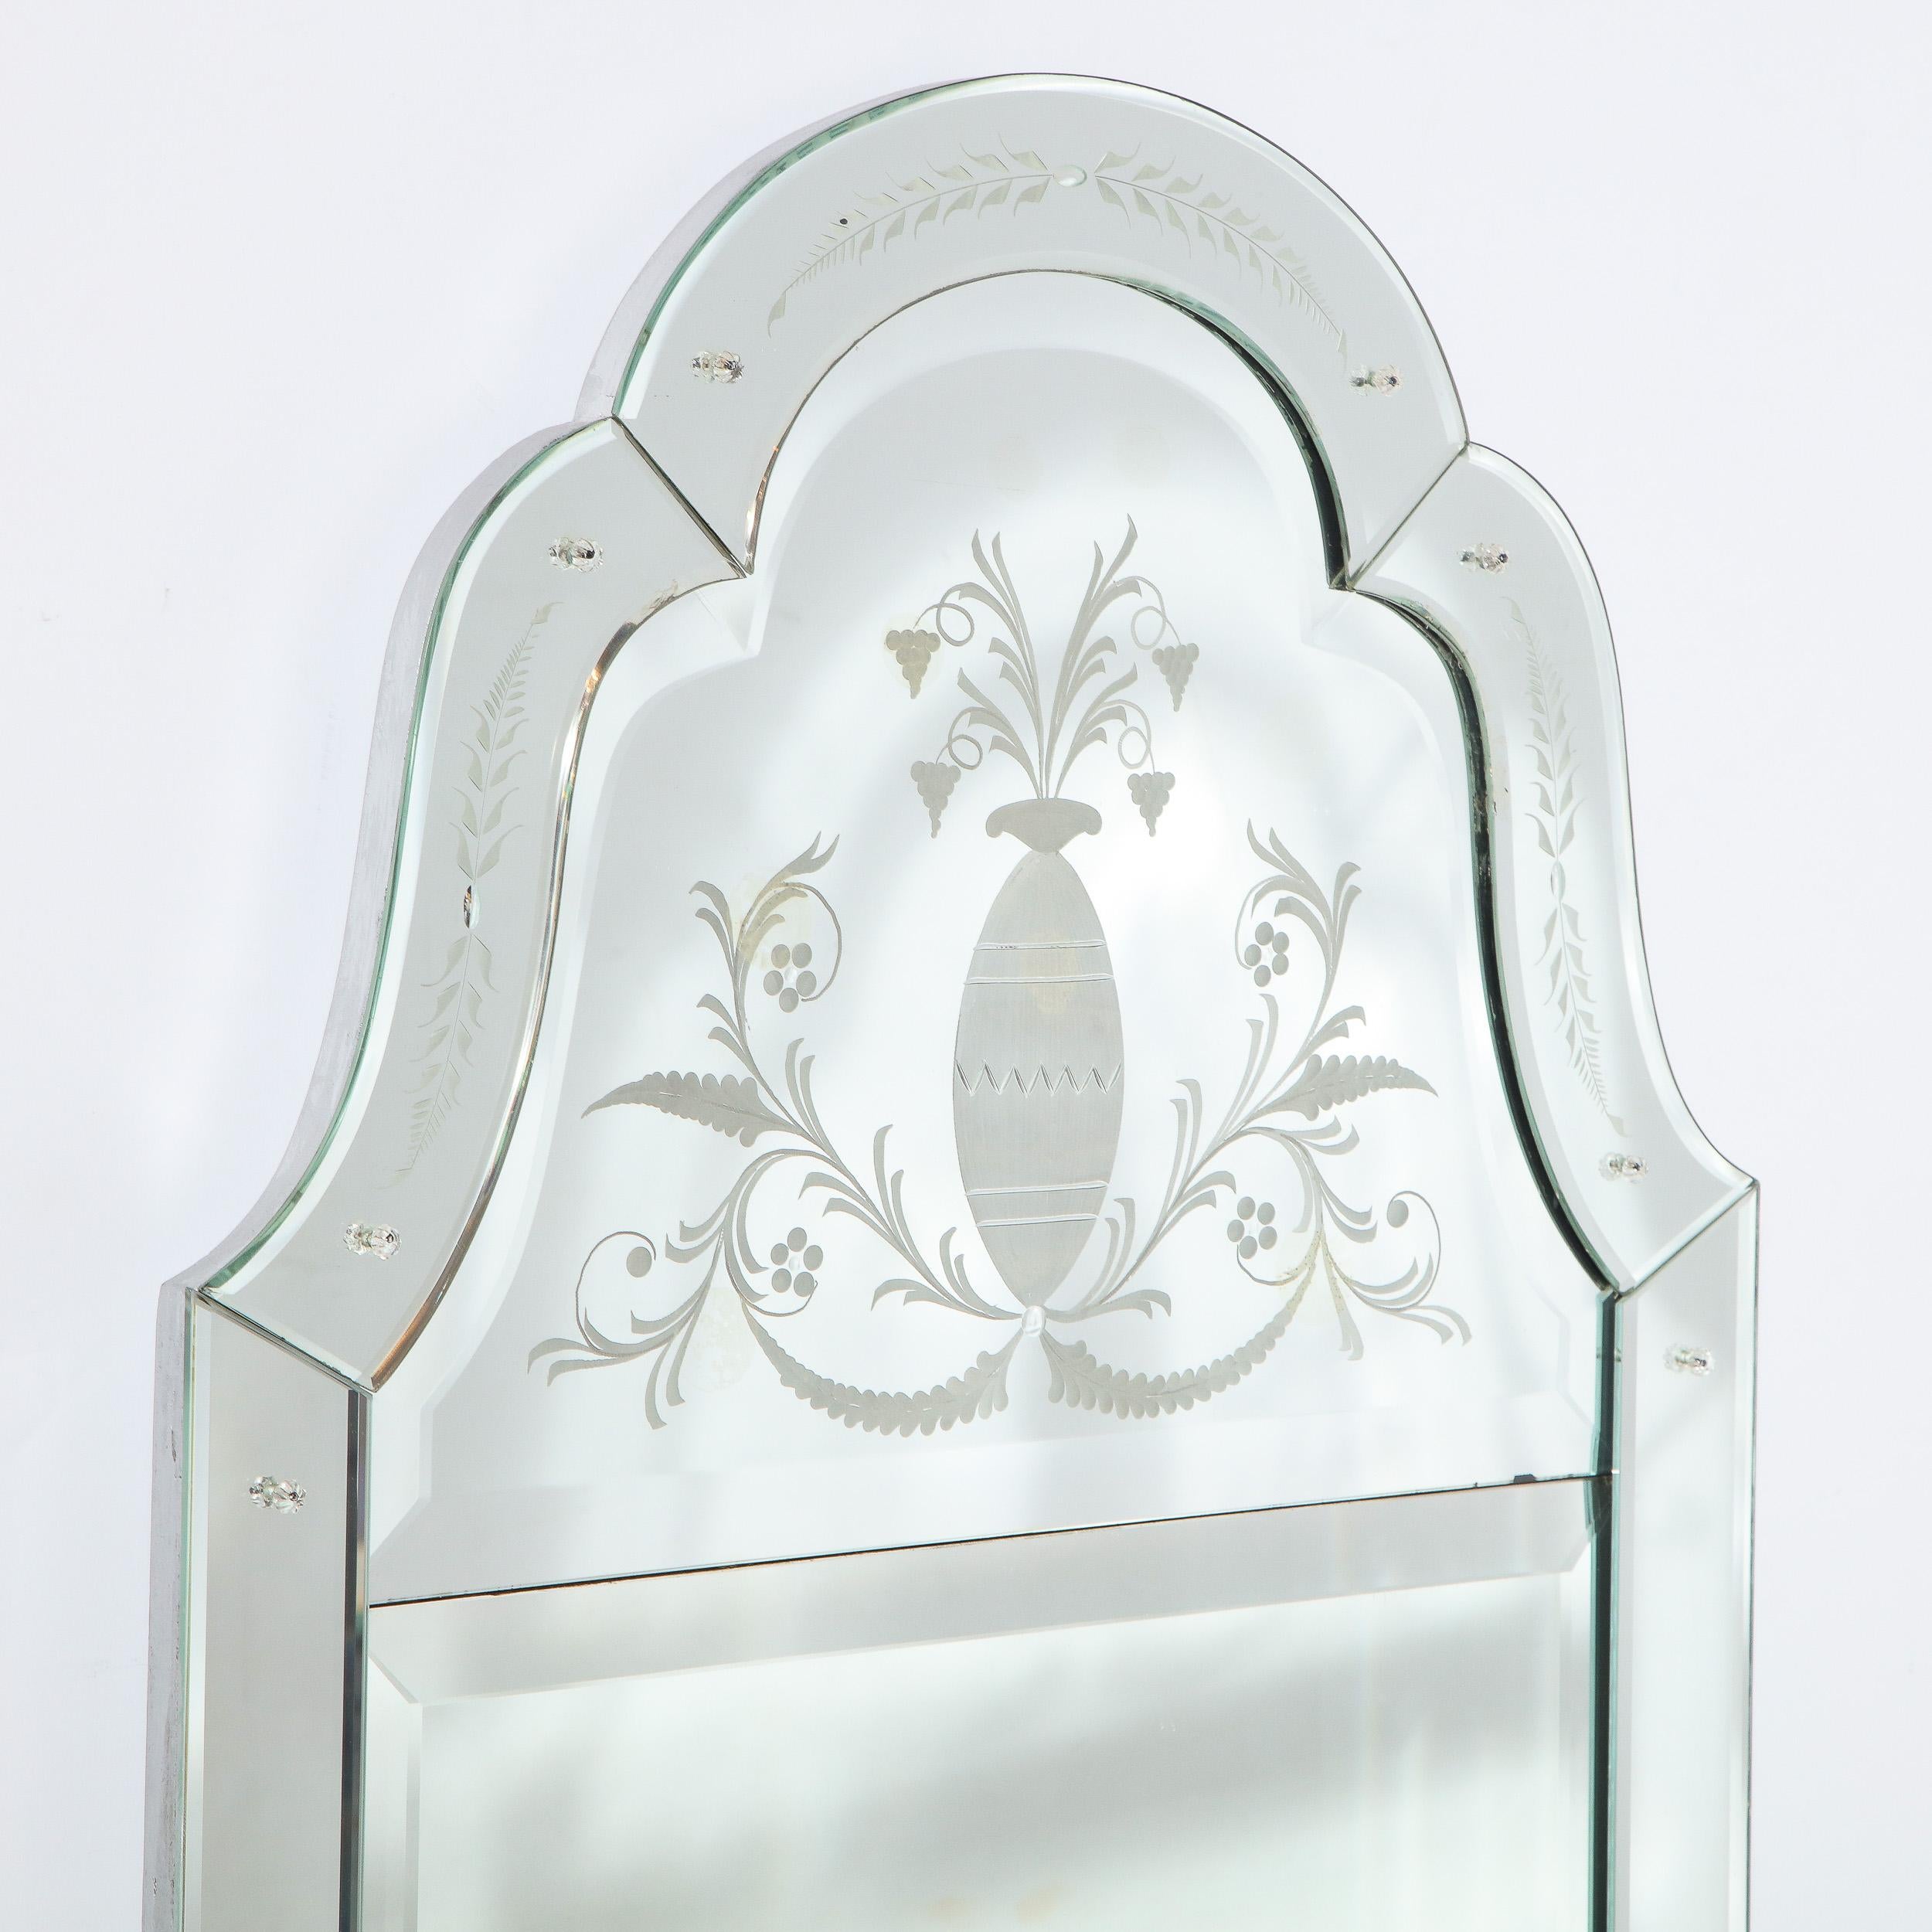 Mid-20th Century Midcentury Neoclassical Style Etched and Scalloped Mirror with Foliate Detailing